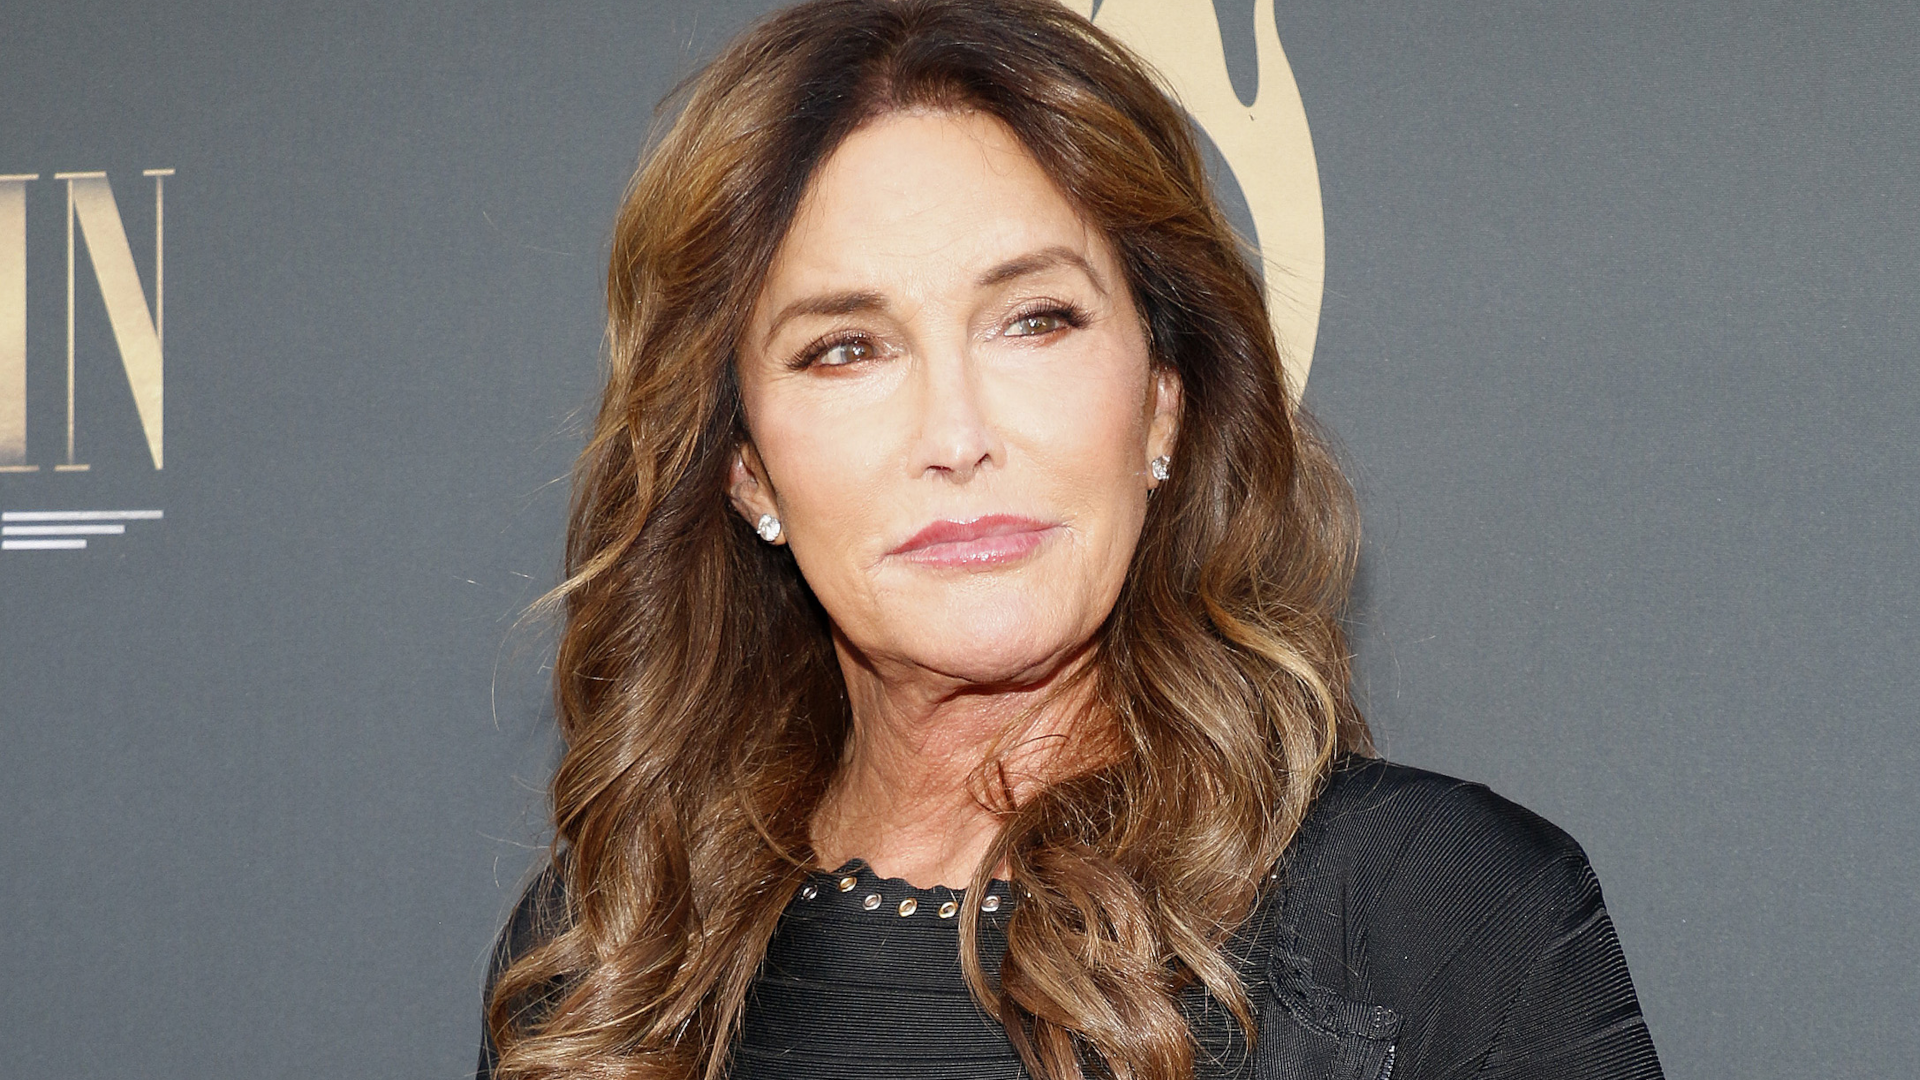 Caitlyn Jenner Launching Ethereum Token Inspired by Olympic Gold Medal on Base